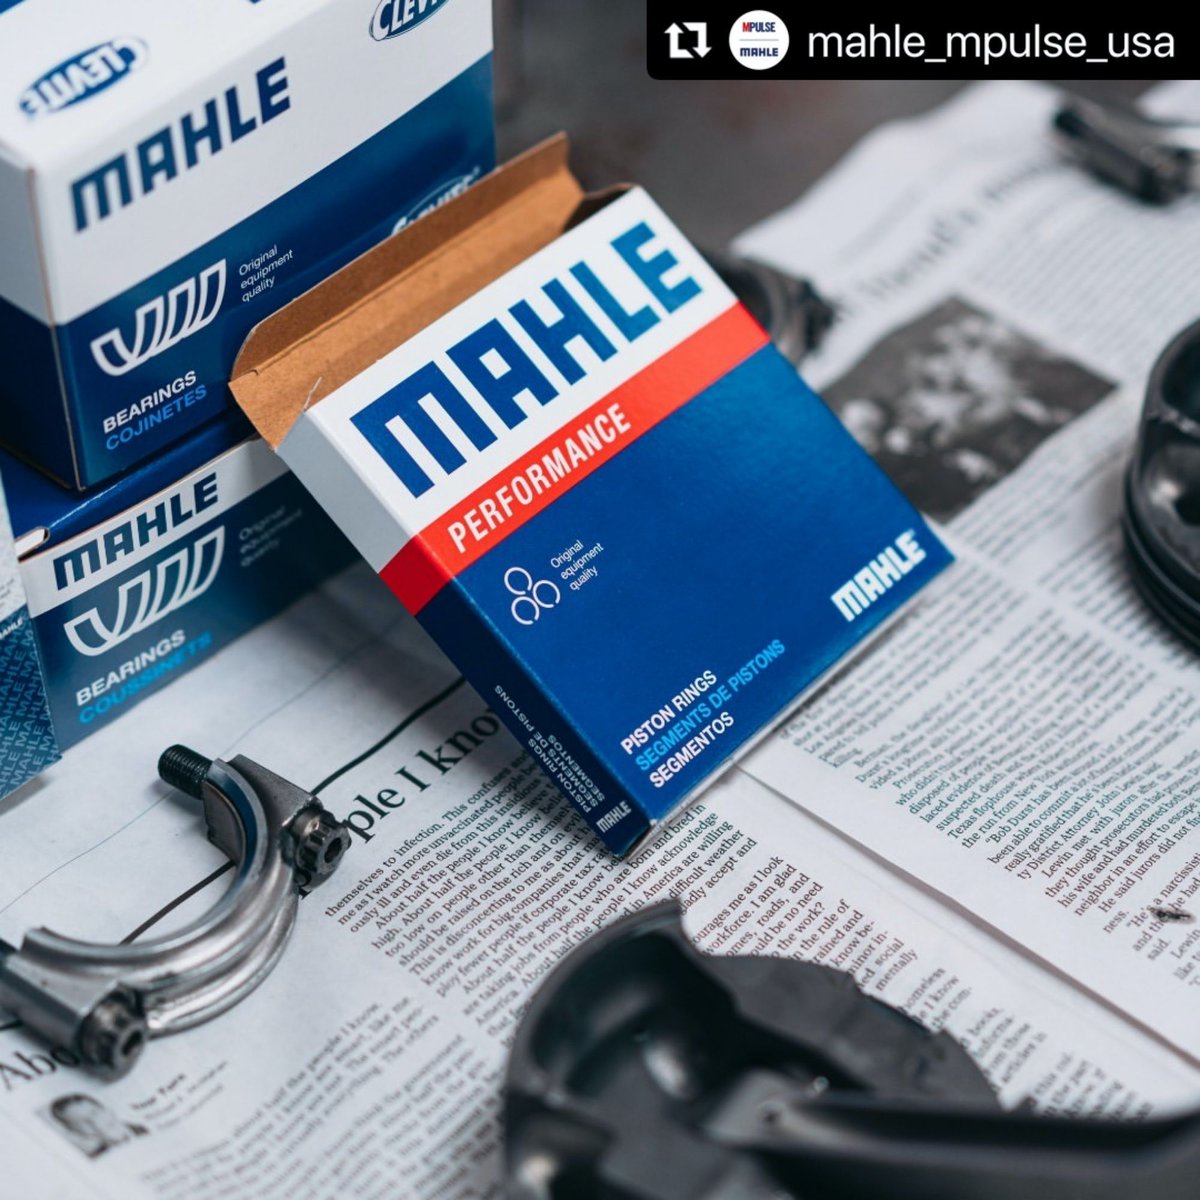 High-performance engines put greater demand on piston rings than ever before, running at higher temperatures, cylinder pressures, and higher operating RPM. That's where components like @MAHLE_AM_NA piston rings come into play. DM us to start your order. #racewithpmp